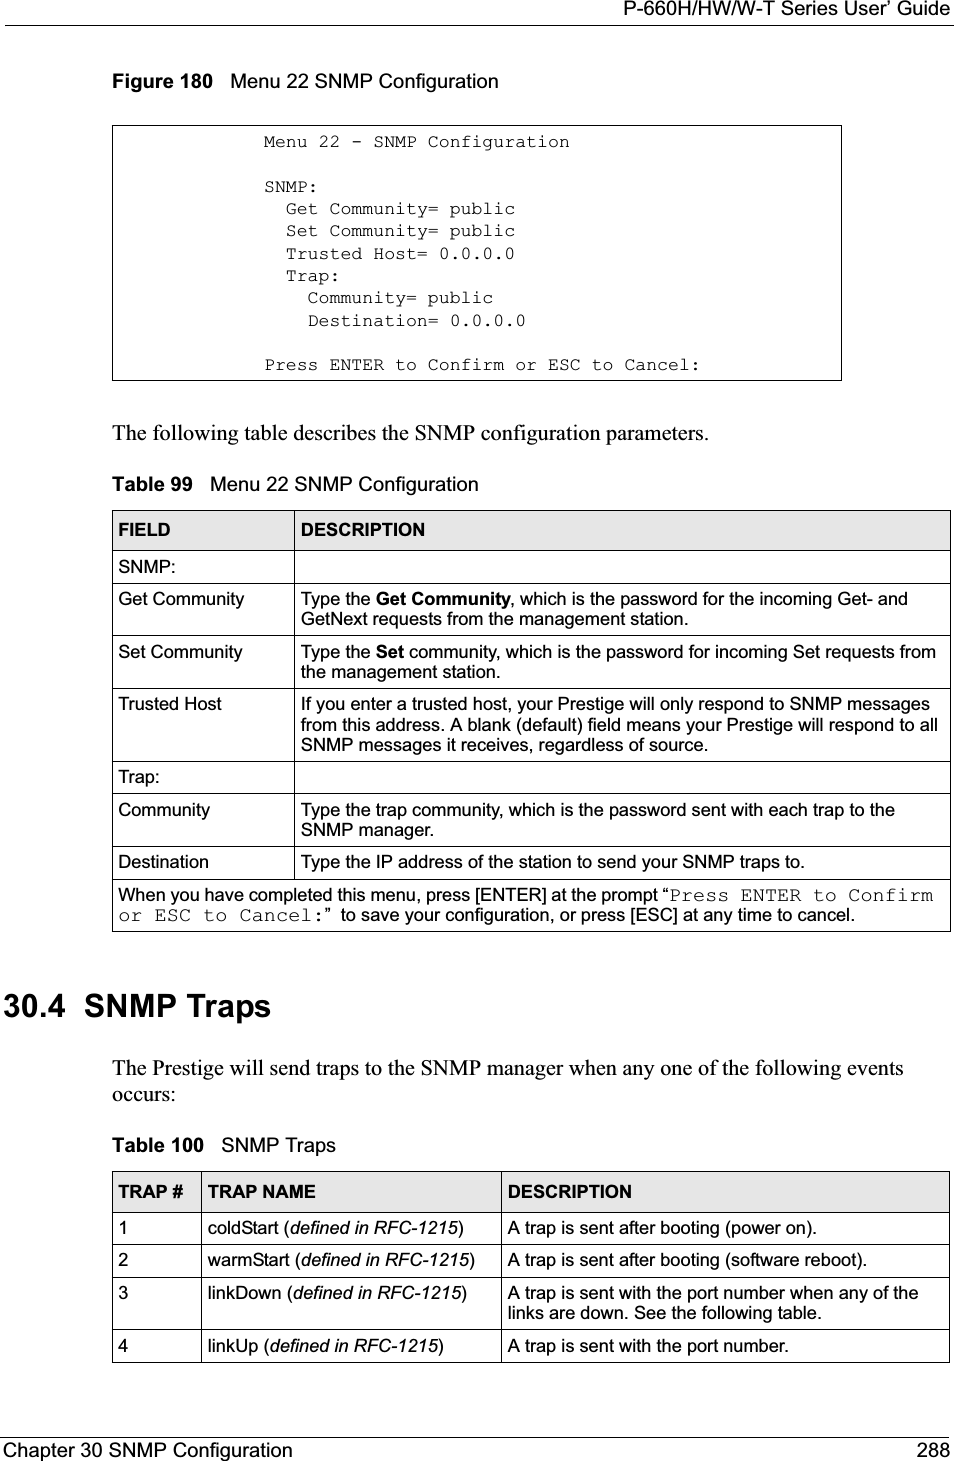 P-660H/HW/W-T Series User’ GuideChapter 30 SNMP Configuration 288Figure 180   Menu 22 SNMP ConfigurationThe following table describes the SNMP configuration parameters.30.4  SNMP Traps The Prestige will send traps to the SNMP manager when any one of the following events occurs:Menu 22 - SNMP ConfigurationSNMP:  Get Community= public  Set Community= public  Trusted Host= 0.0.0.0  Trap:    Community= public    Destination= 0.0.0.0Press ENTER to Confirm or ESC to Cancel:Table 99   Menu 22 SNMP ConfigurationFIELD DESCRIPTIONSNMP:Get Community Type the Get Community, which is the password for the incoming Get- and GetNext requests from the management station.Set Community Type the Set community, which is the password for incoming Set requests from the management station. Trusted Host If you enter a trusted host, your Prestige will only respond to SNMP messages from this address. A blank (default) field means your Prestige will respond to all SNMP messages it receives, regardless of source.Trap:Community Type the trap community, which is the password sent with each trap to the SNMP manager. Destination Type the IP address of the station to send your SNMP traps to.When you have completed this menu, press [ENTER] at the prompt “Press ENTER to Confirm or ESC to Cancel:”  to save your configuration, or press [ESC] at any time to cancel.Table 100   SNMP TrapsTRAP # TRAP NAME DESCRIPTION1coldStart (defined in RFC-1215)A trap is sent after booting (power on).2warmStart (defined in RFC-1215)A trap is sent after booting (software reboot).3linkDown (defined in RFC-1215)A trap is sent with the port number when any of the links are down. See the following table.4linkUp (defined in RFC-1215)A trap is sent with the port number.